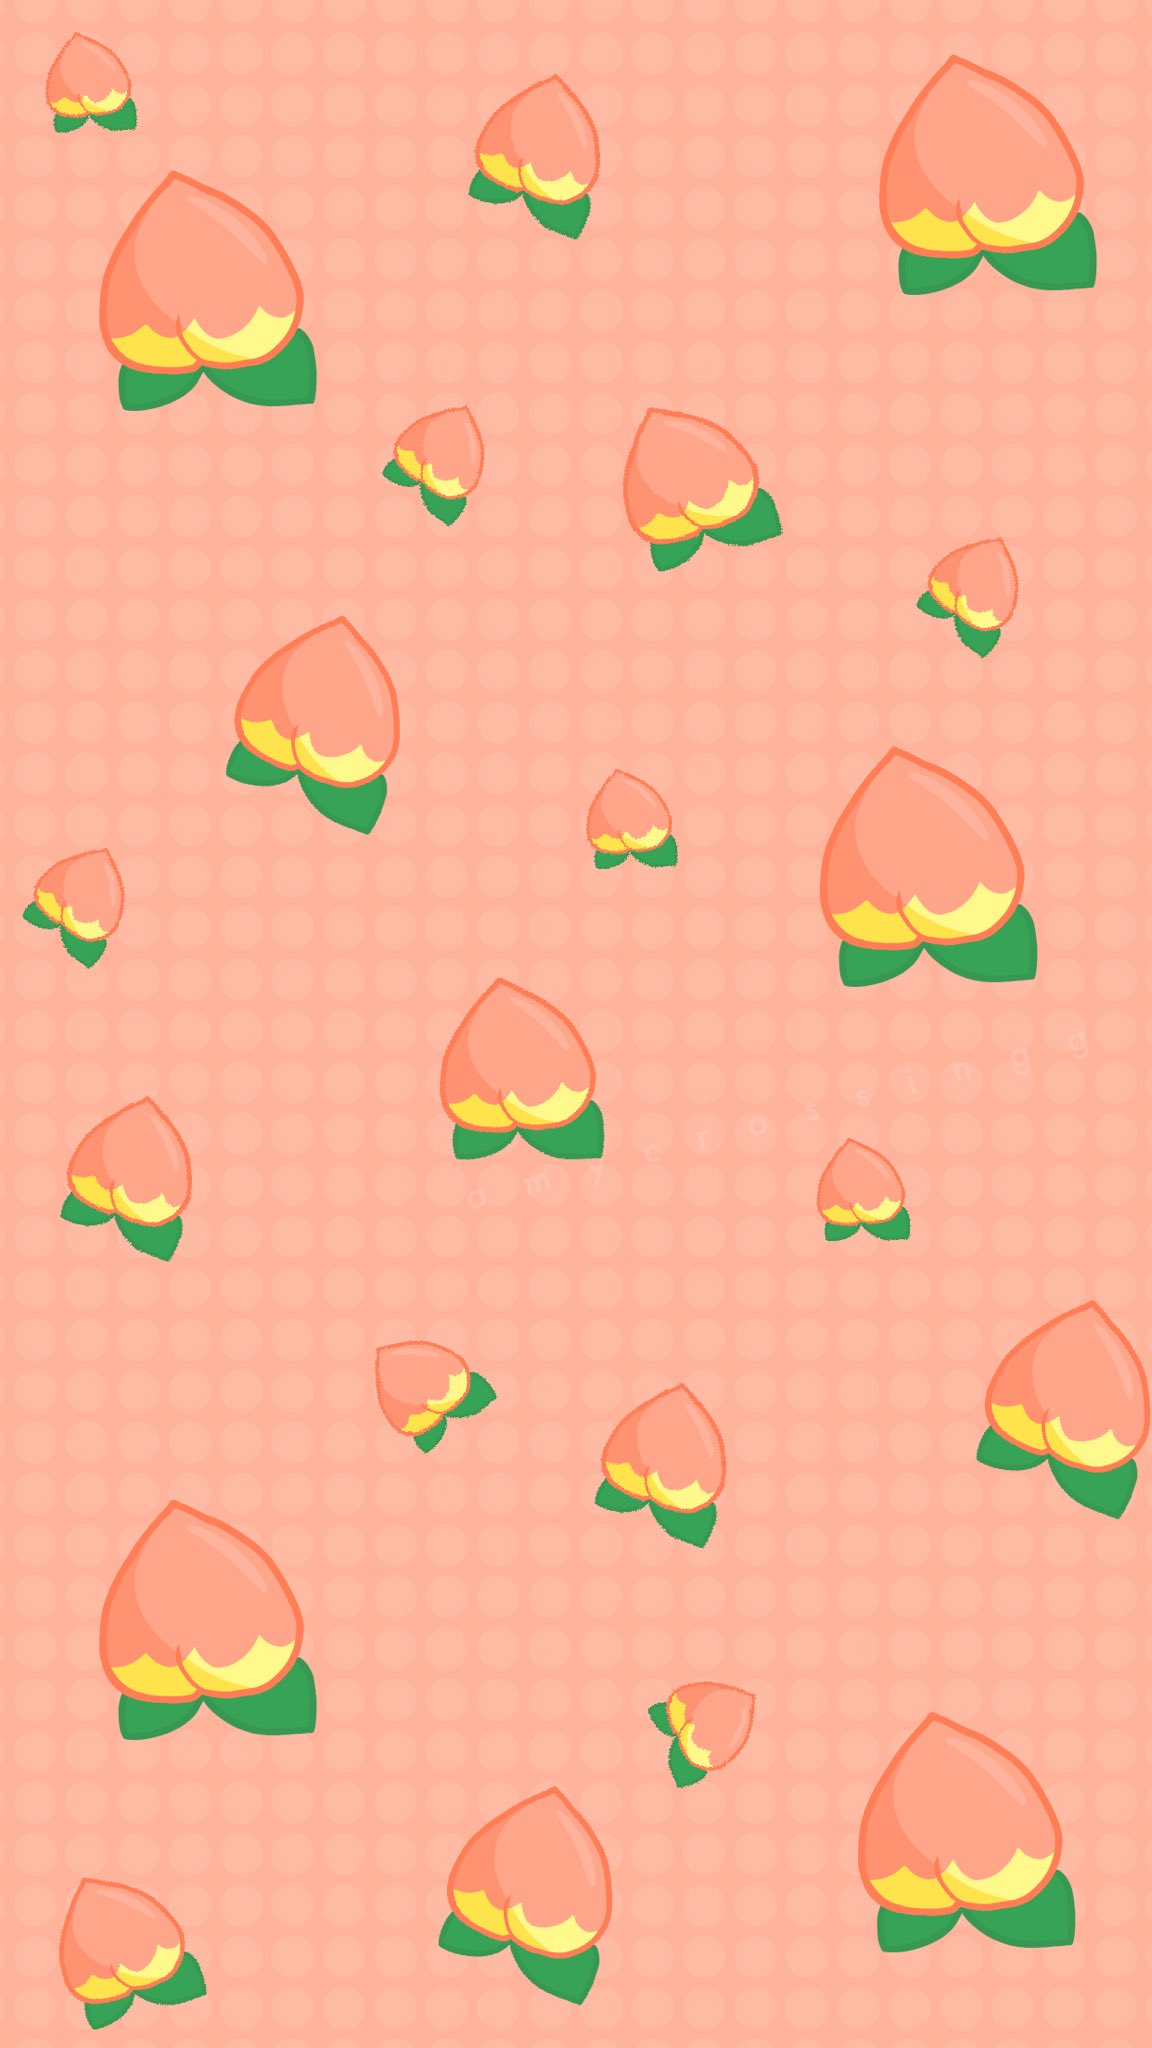 A peach pattern with green leaves on a pink background - Animal Crossing